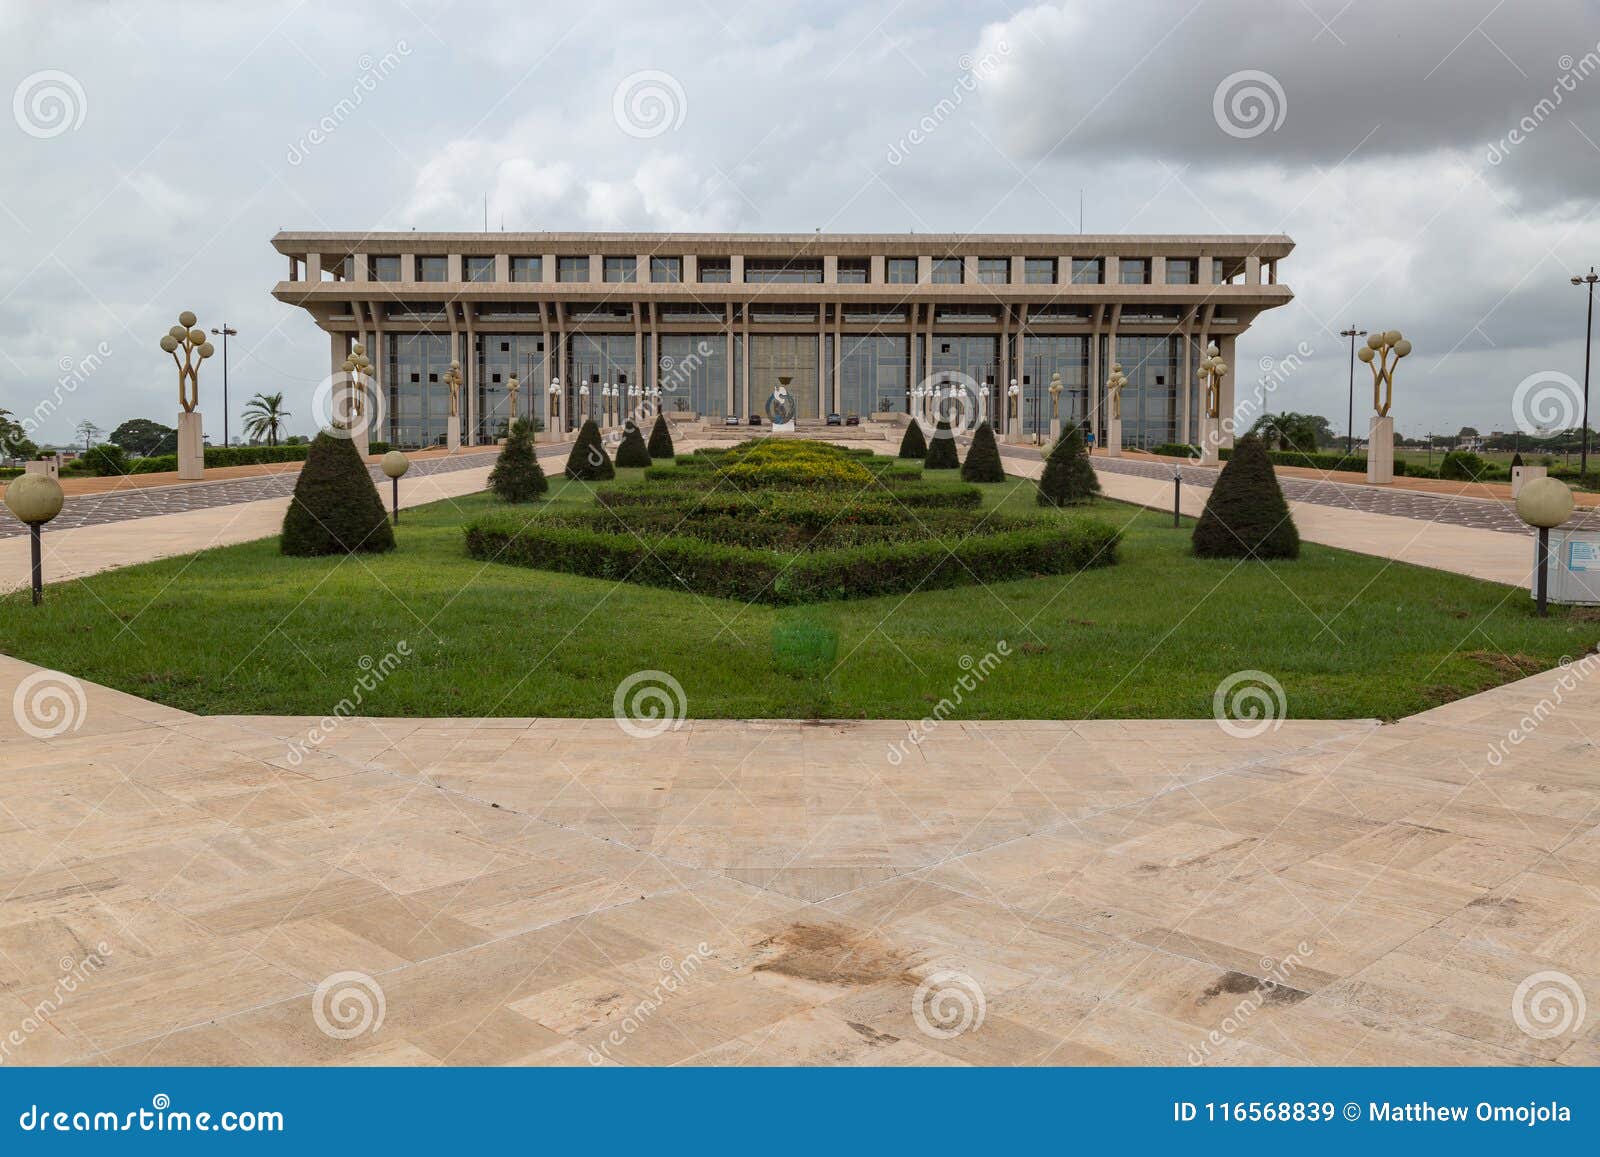 foundation for peace research in yamoussoukro